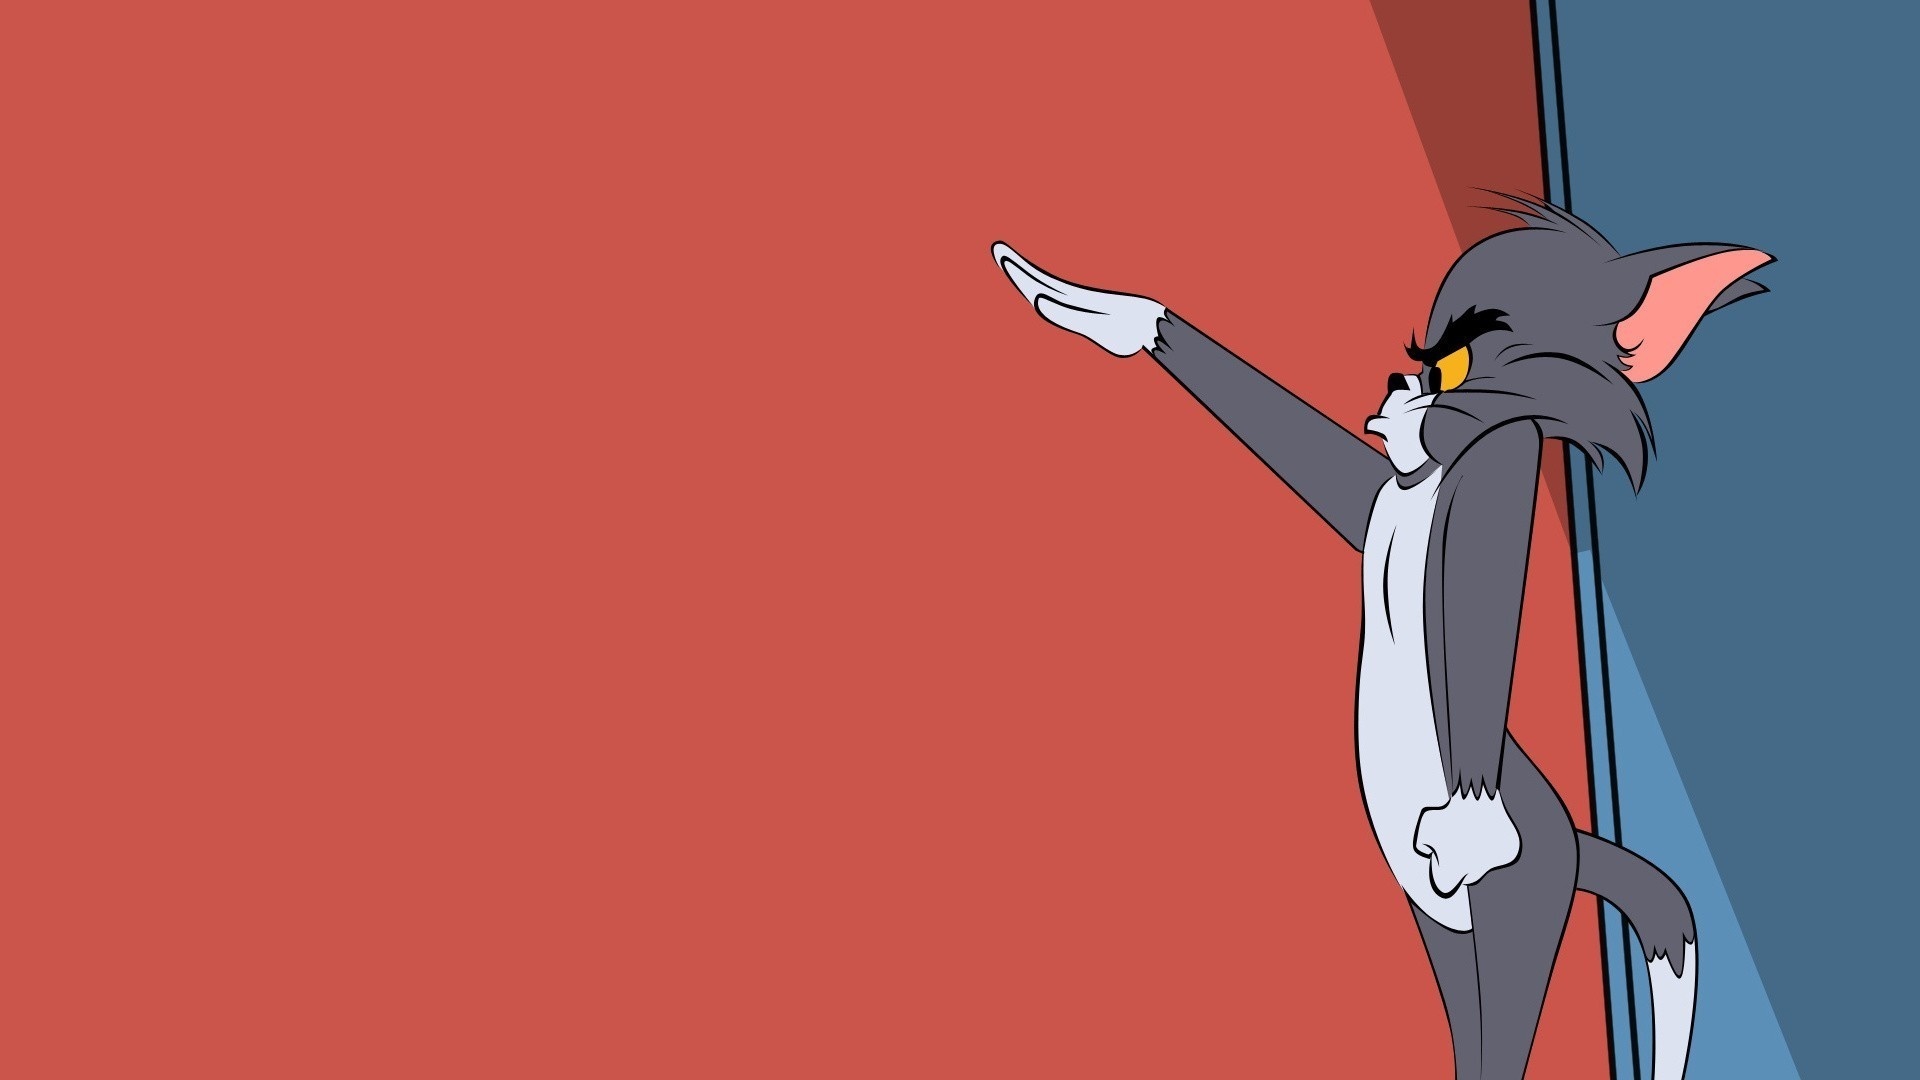 tom and jerry, tv show wallpaper for mobile